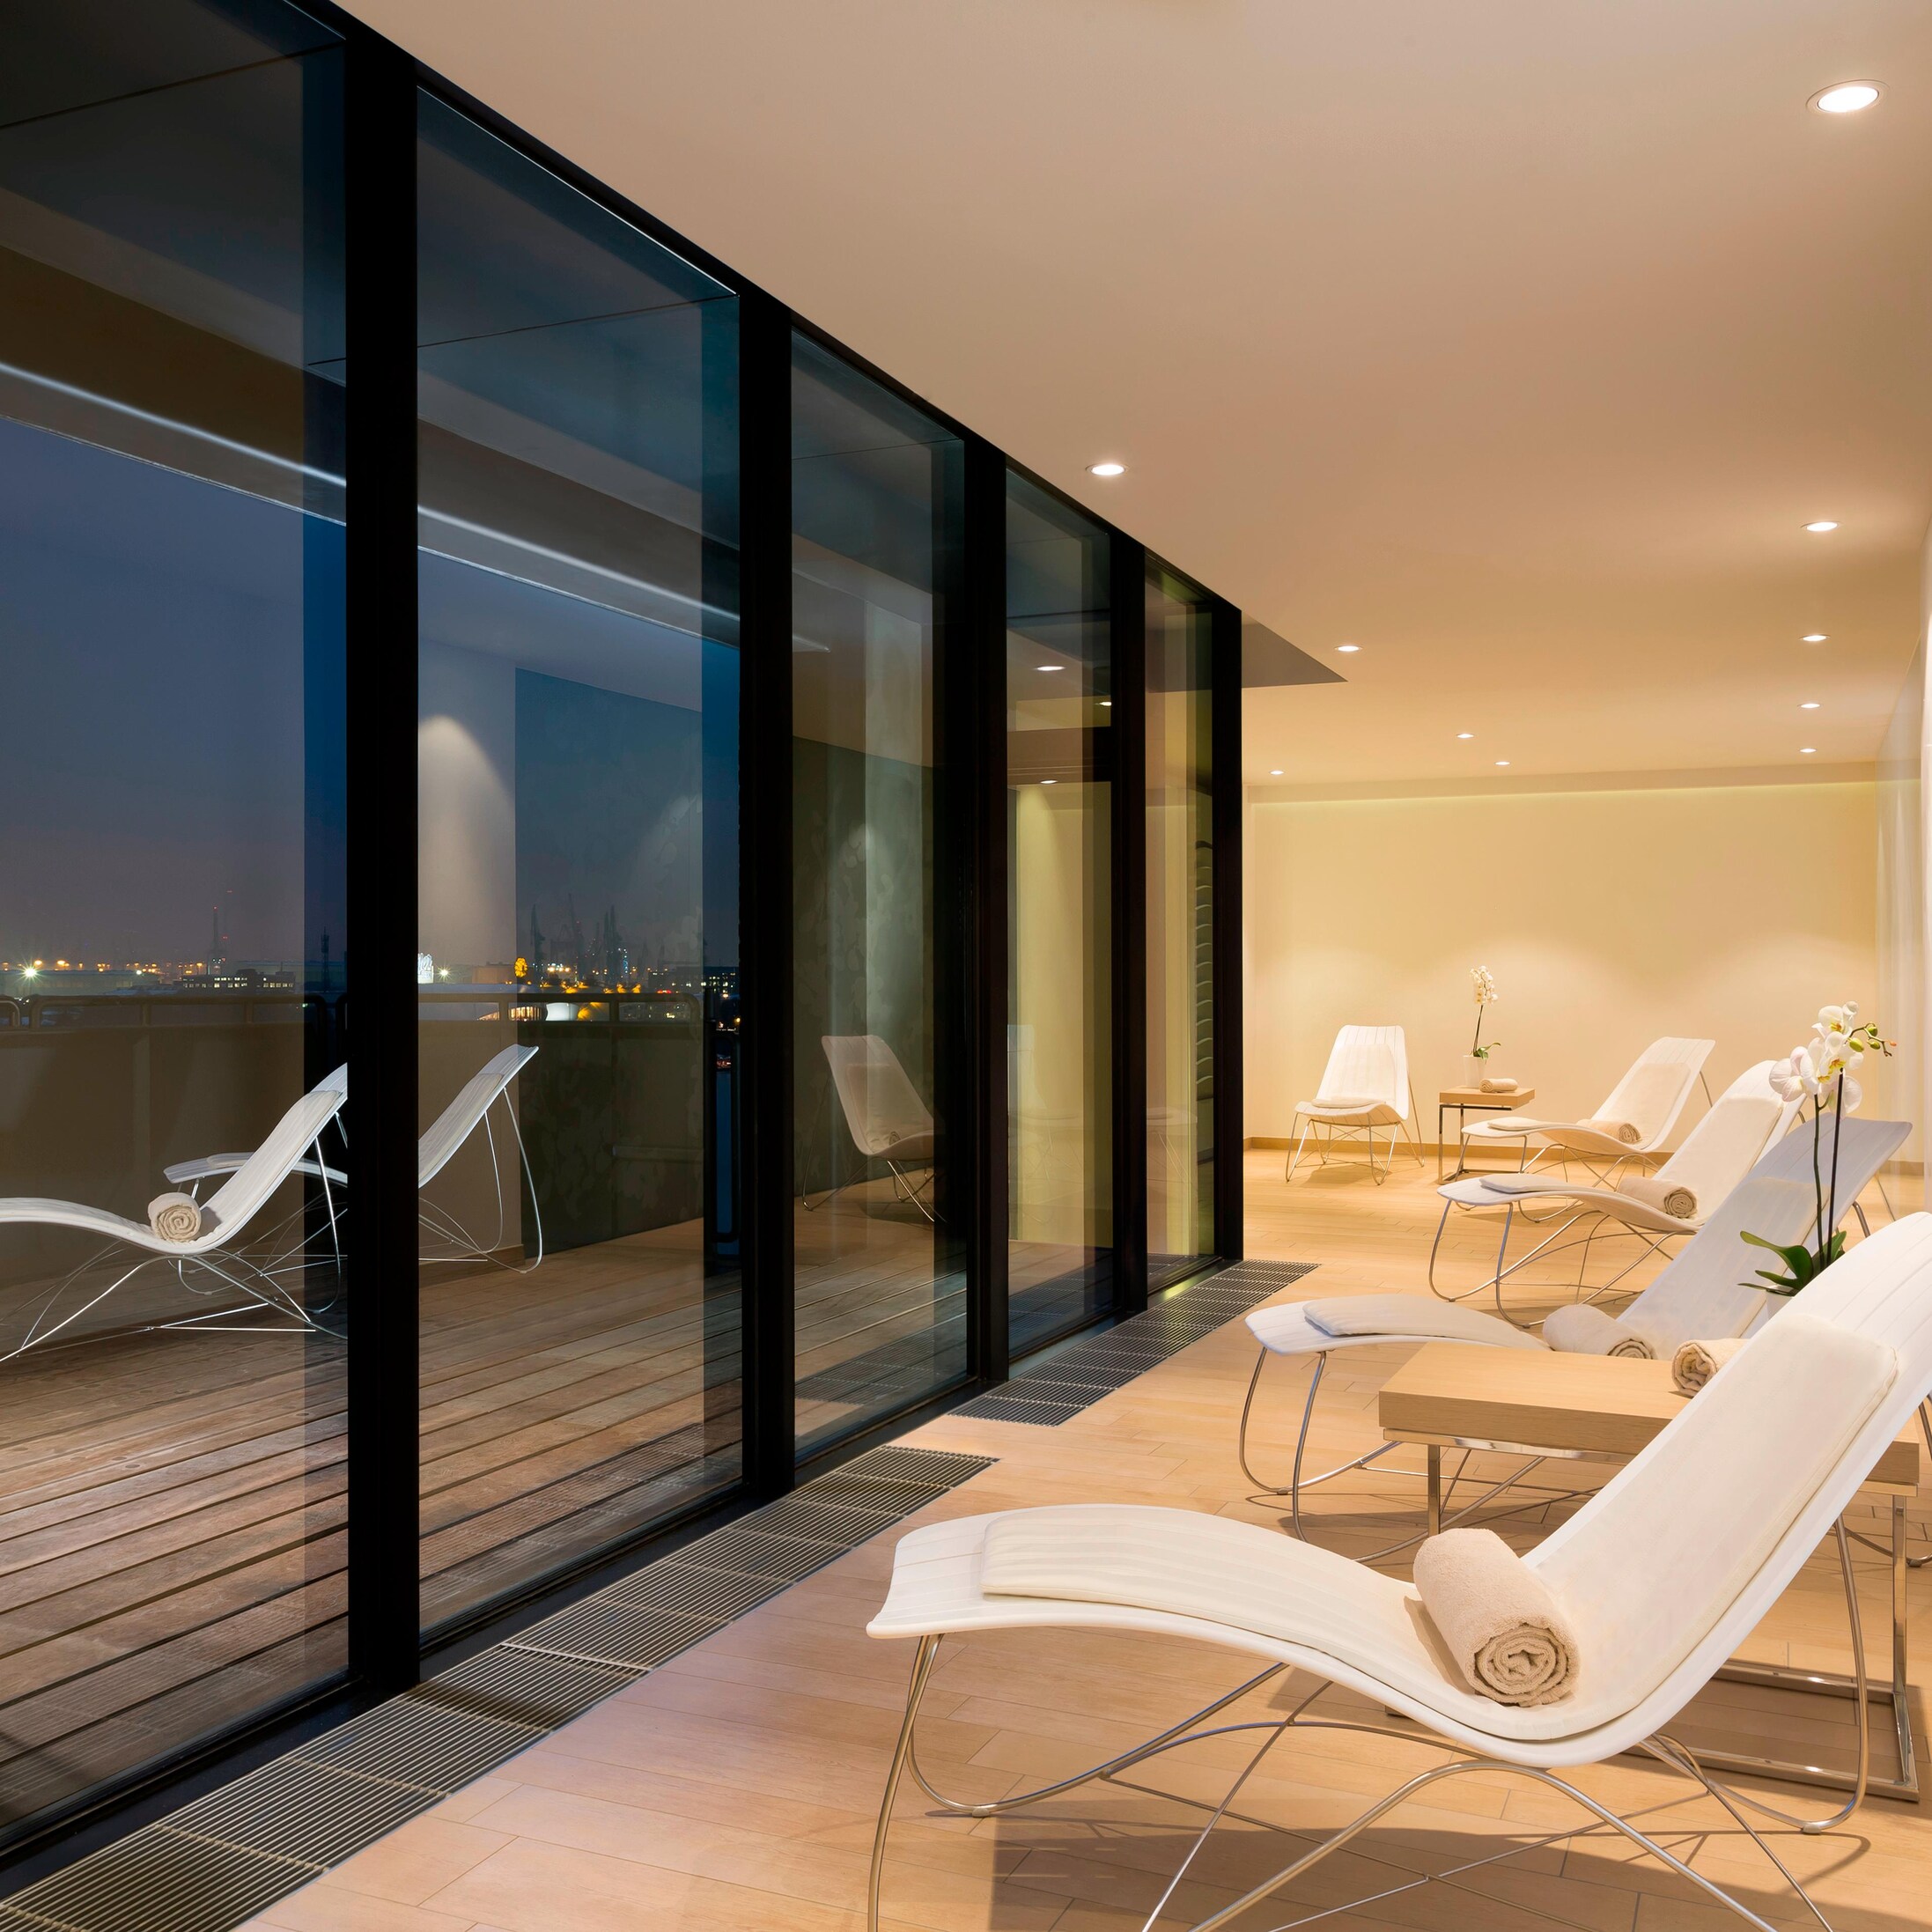 Line of lounge chairs facing floor to ceiling windows at dusk.